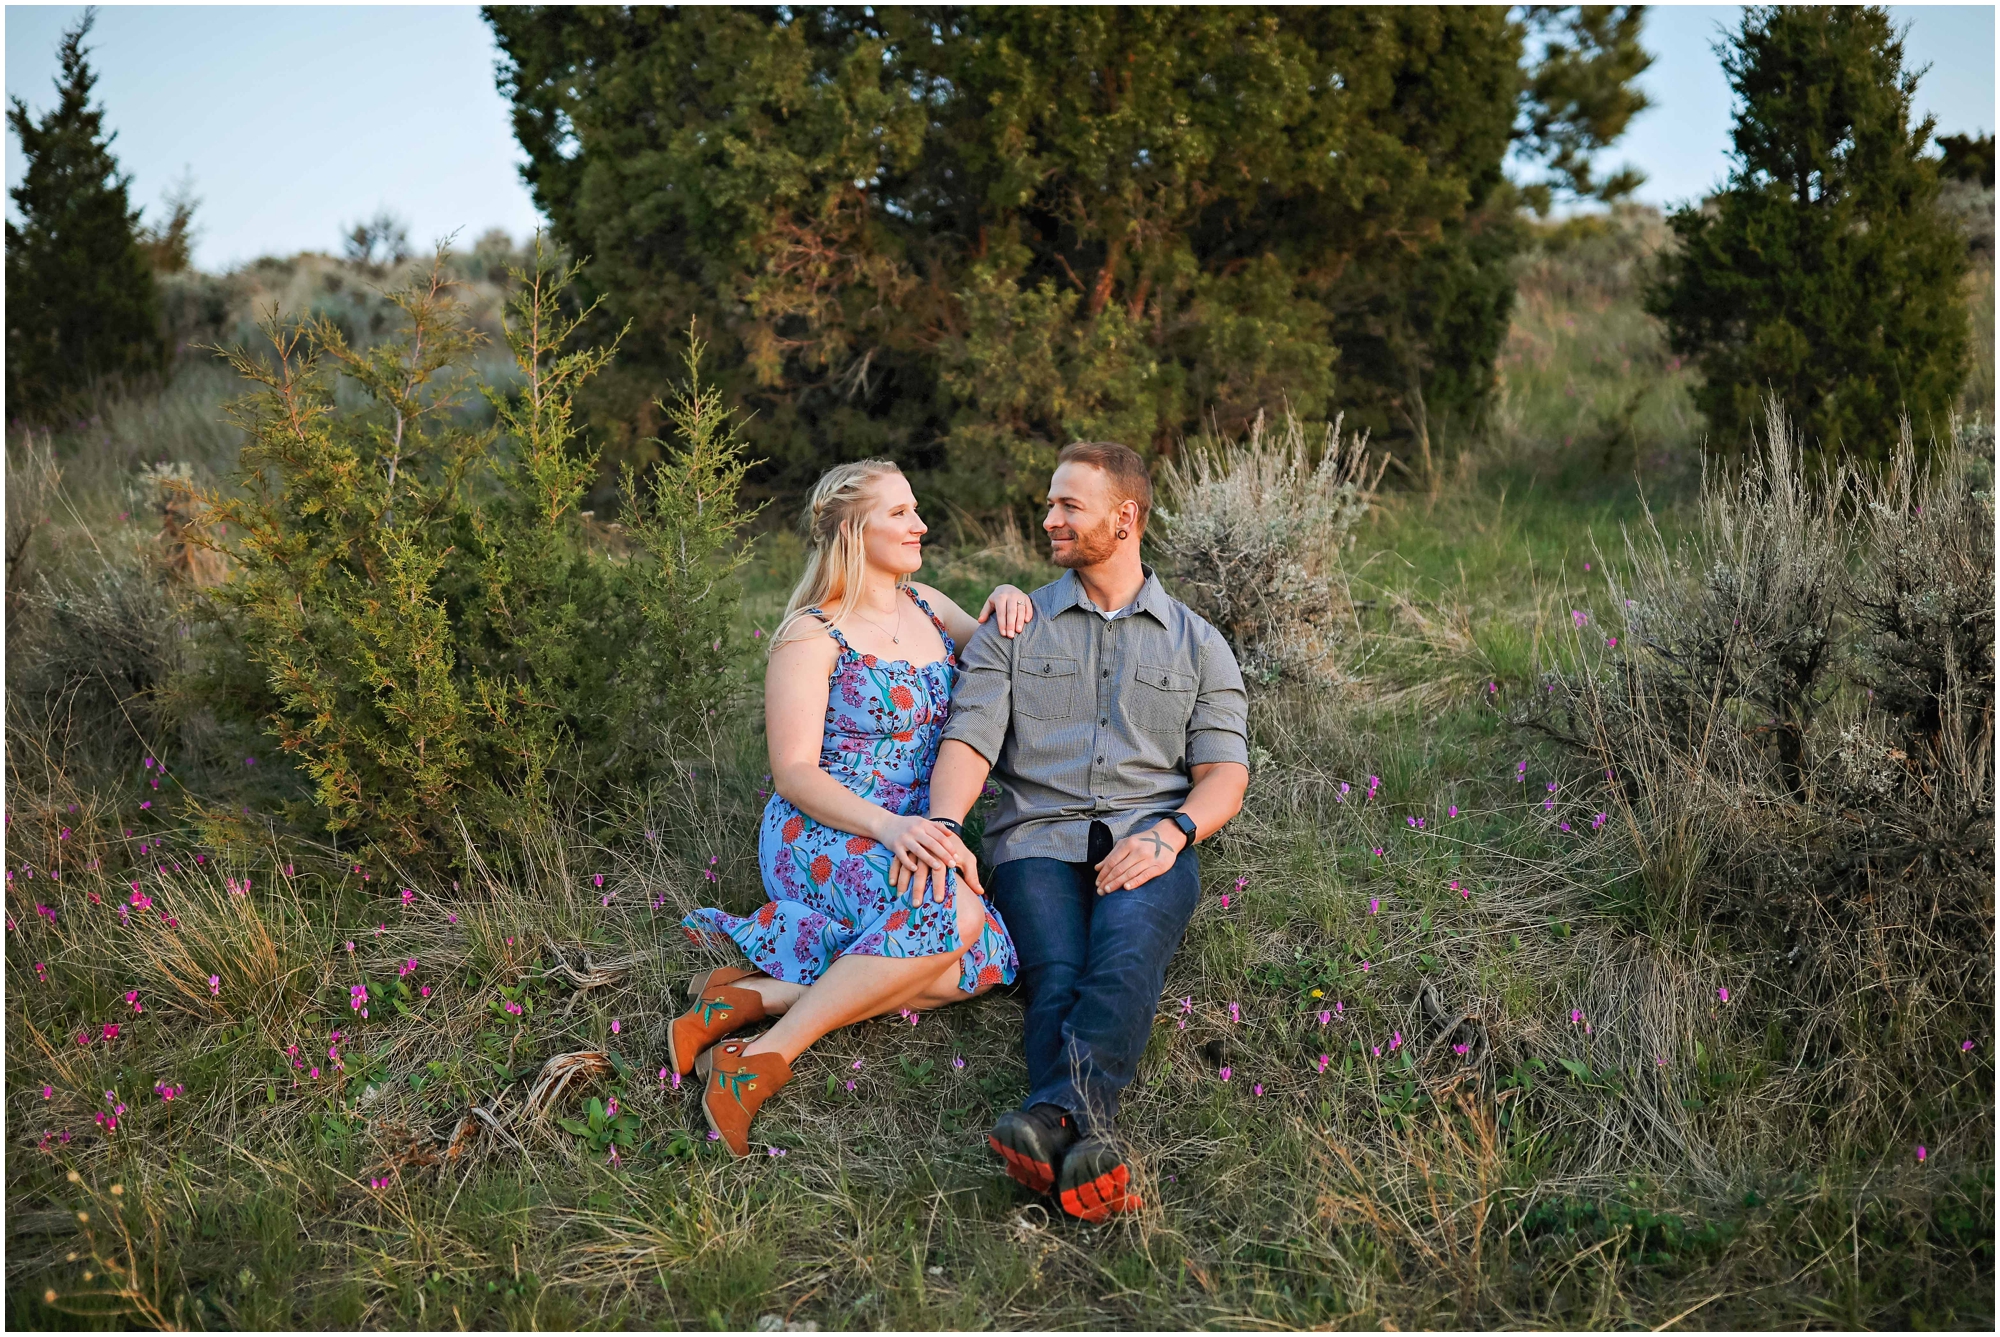 Engaged couple sitting in grassy field with trees and flowers